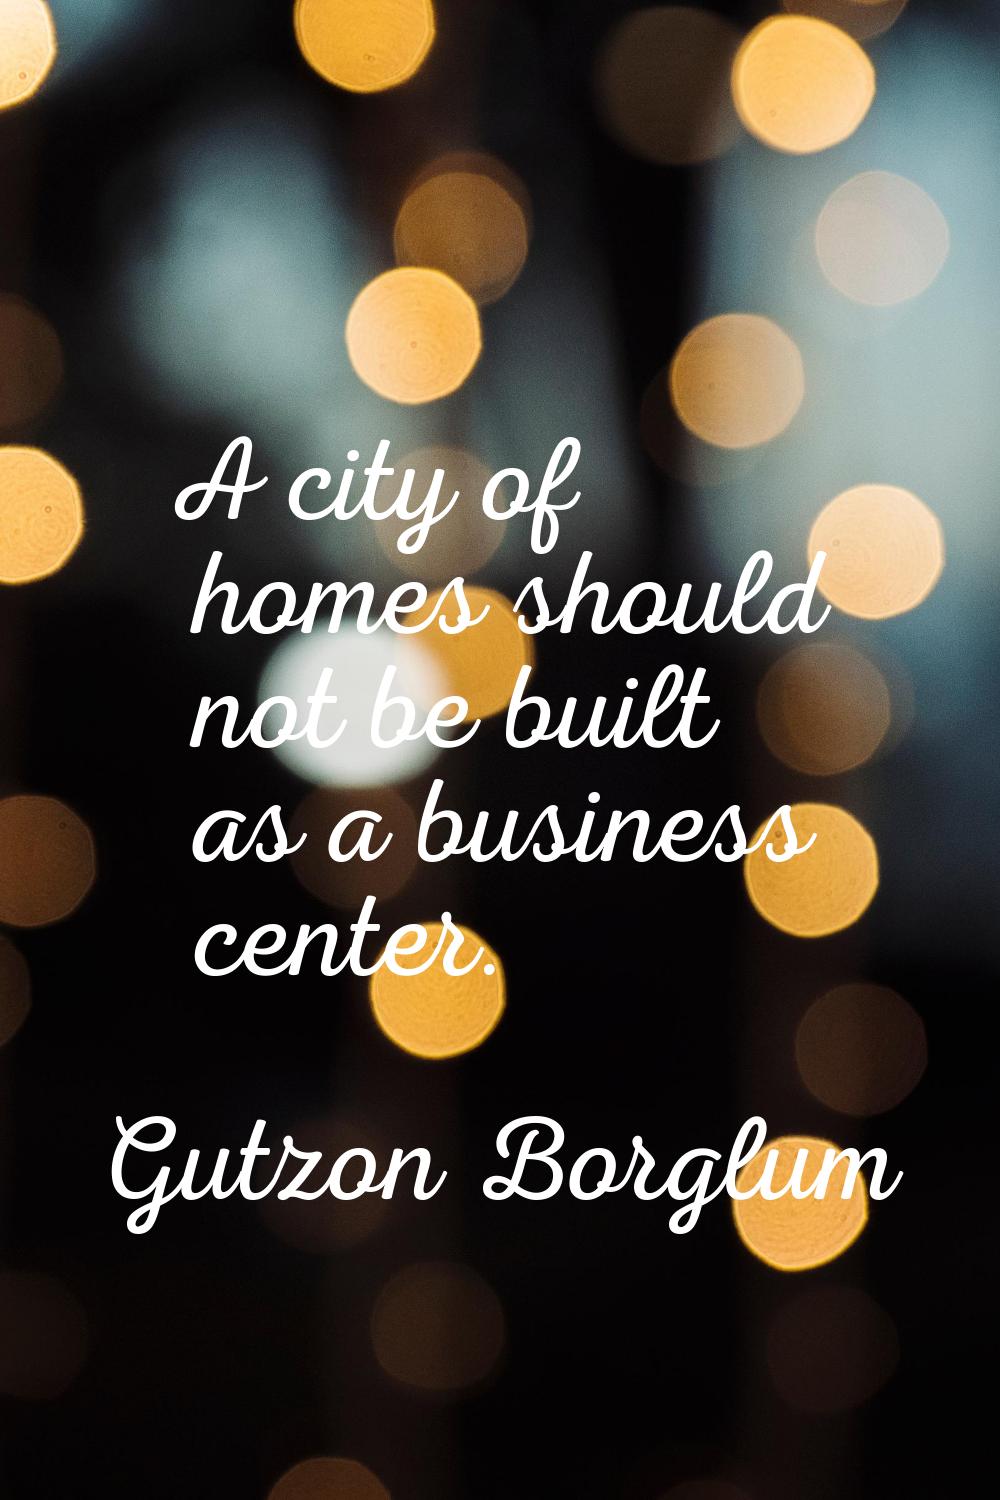 A city of homes should not be built as a business center.